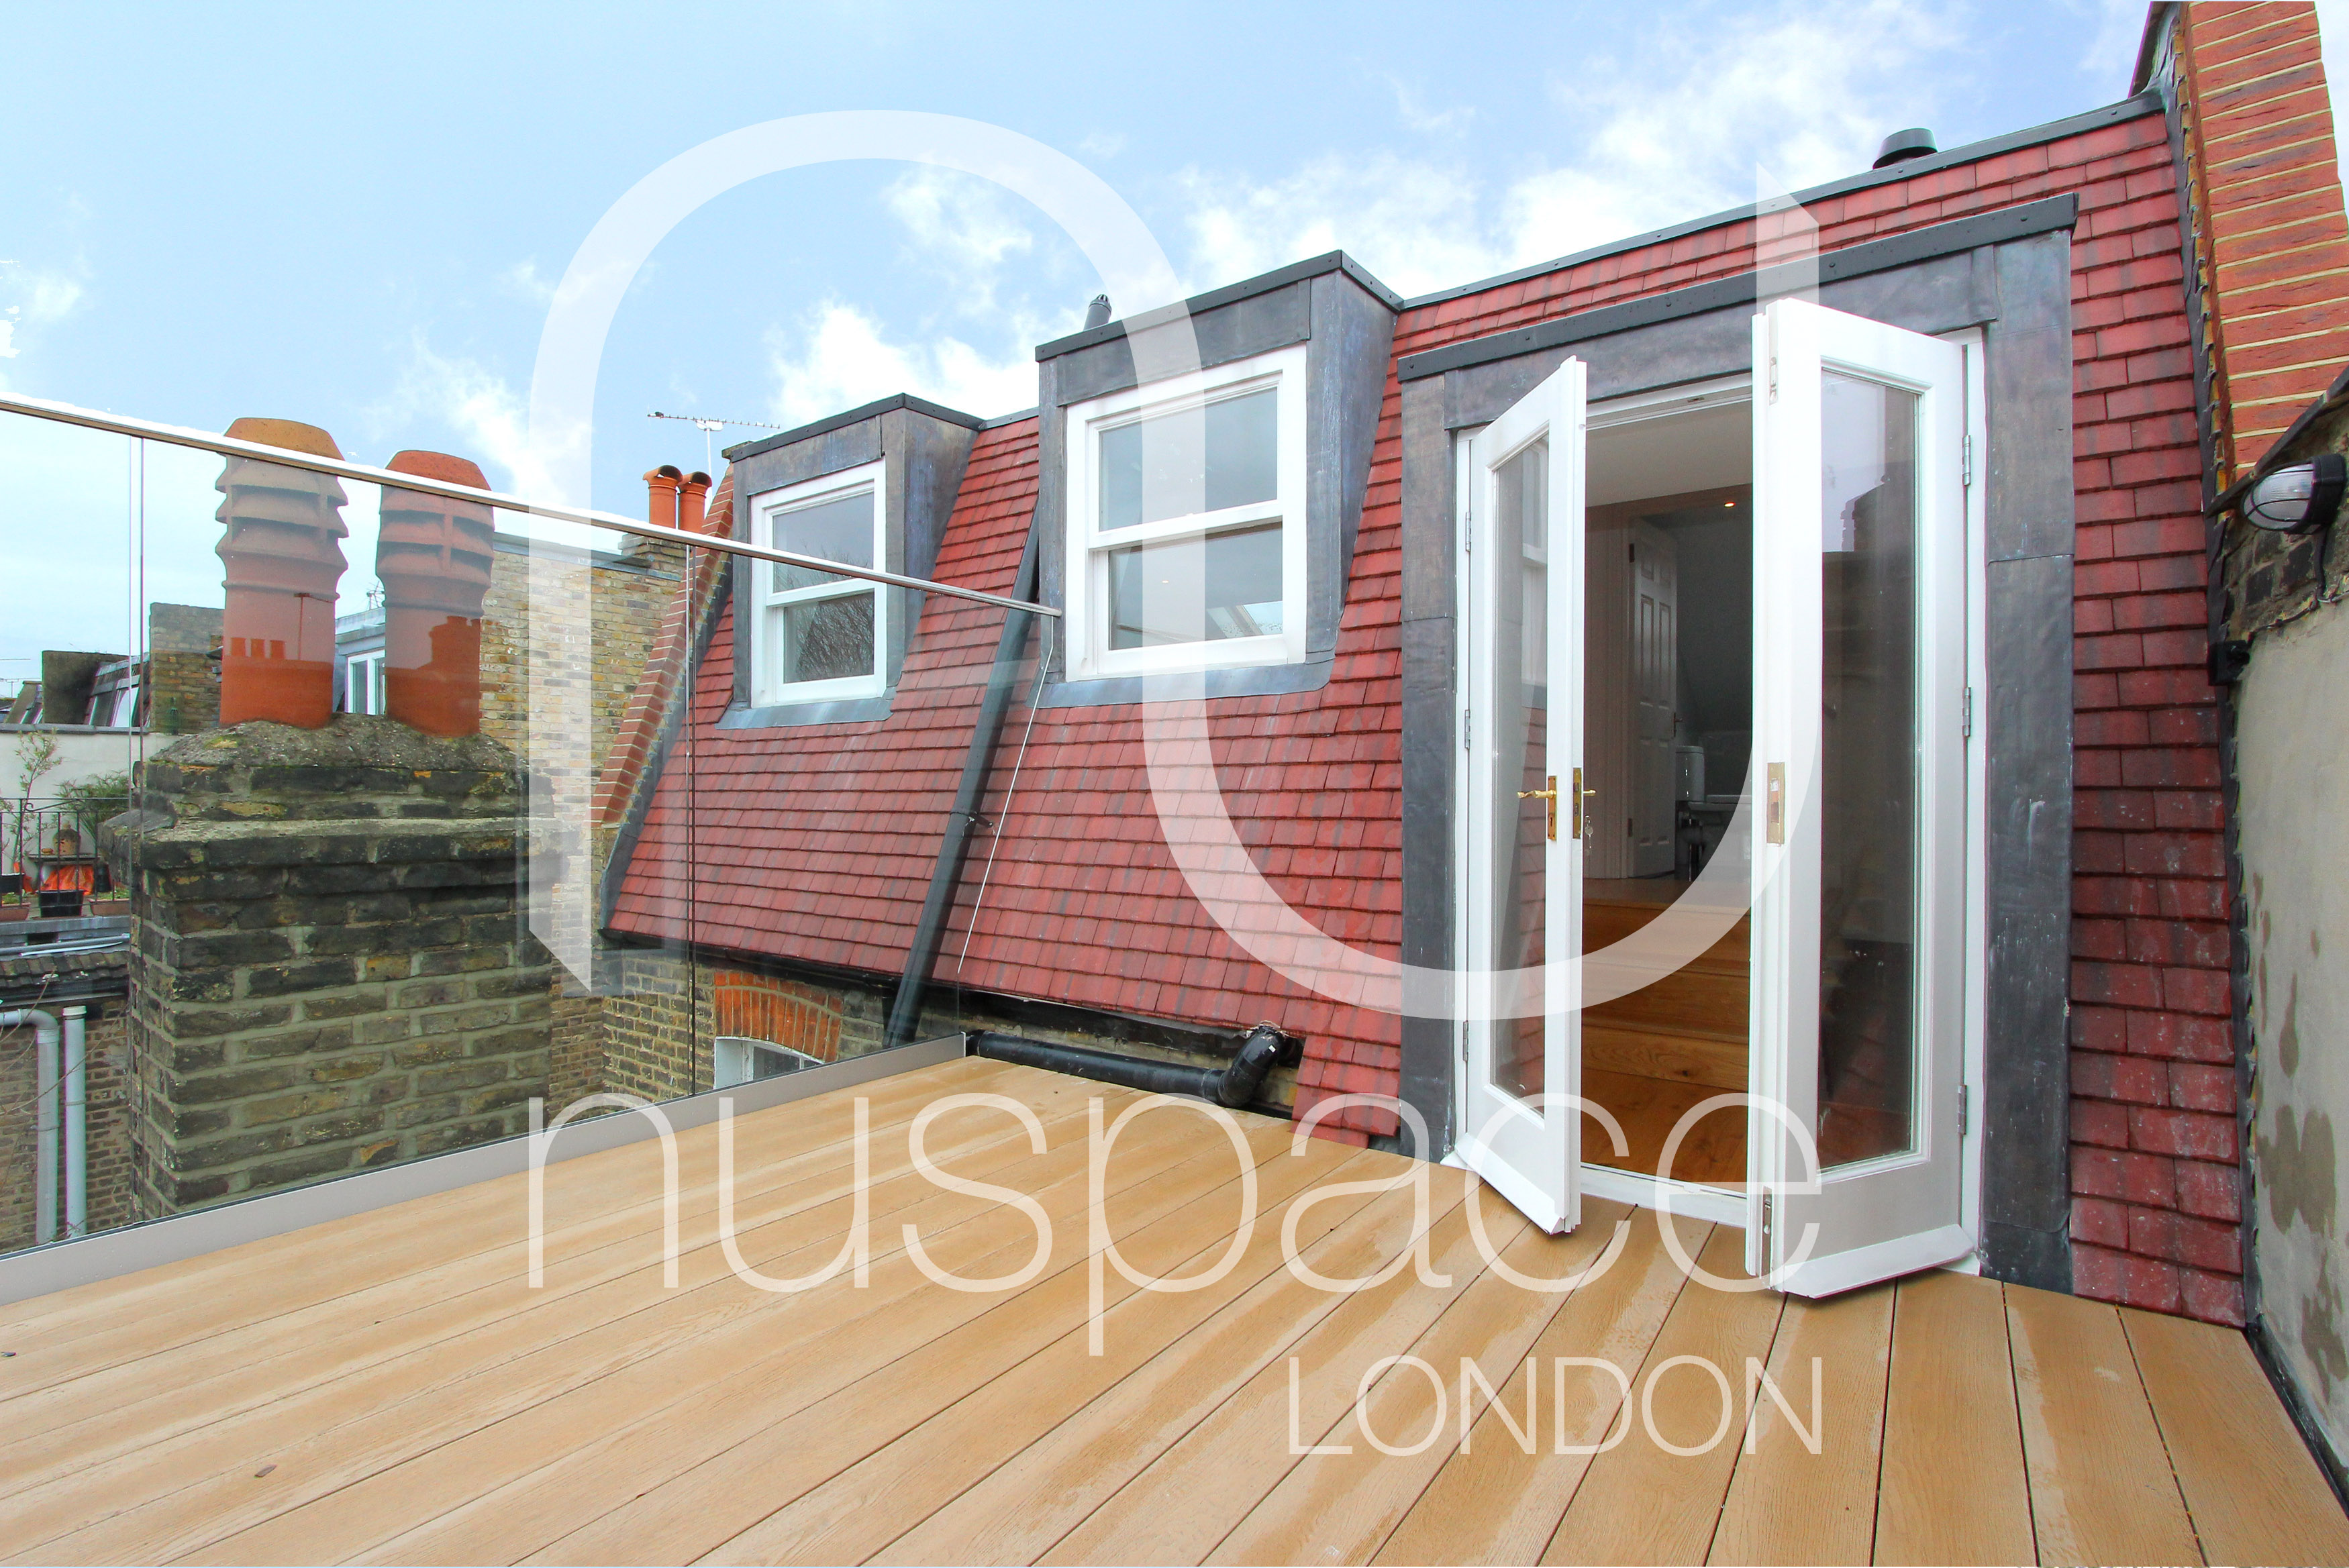 A guide to roof terrace loft conversions